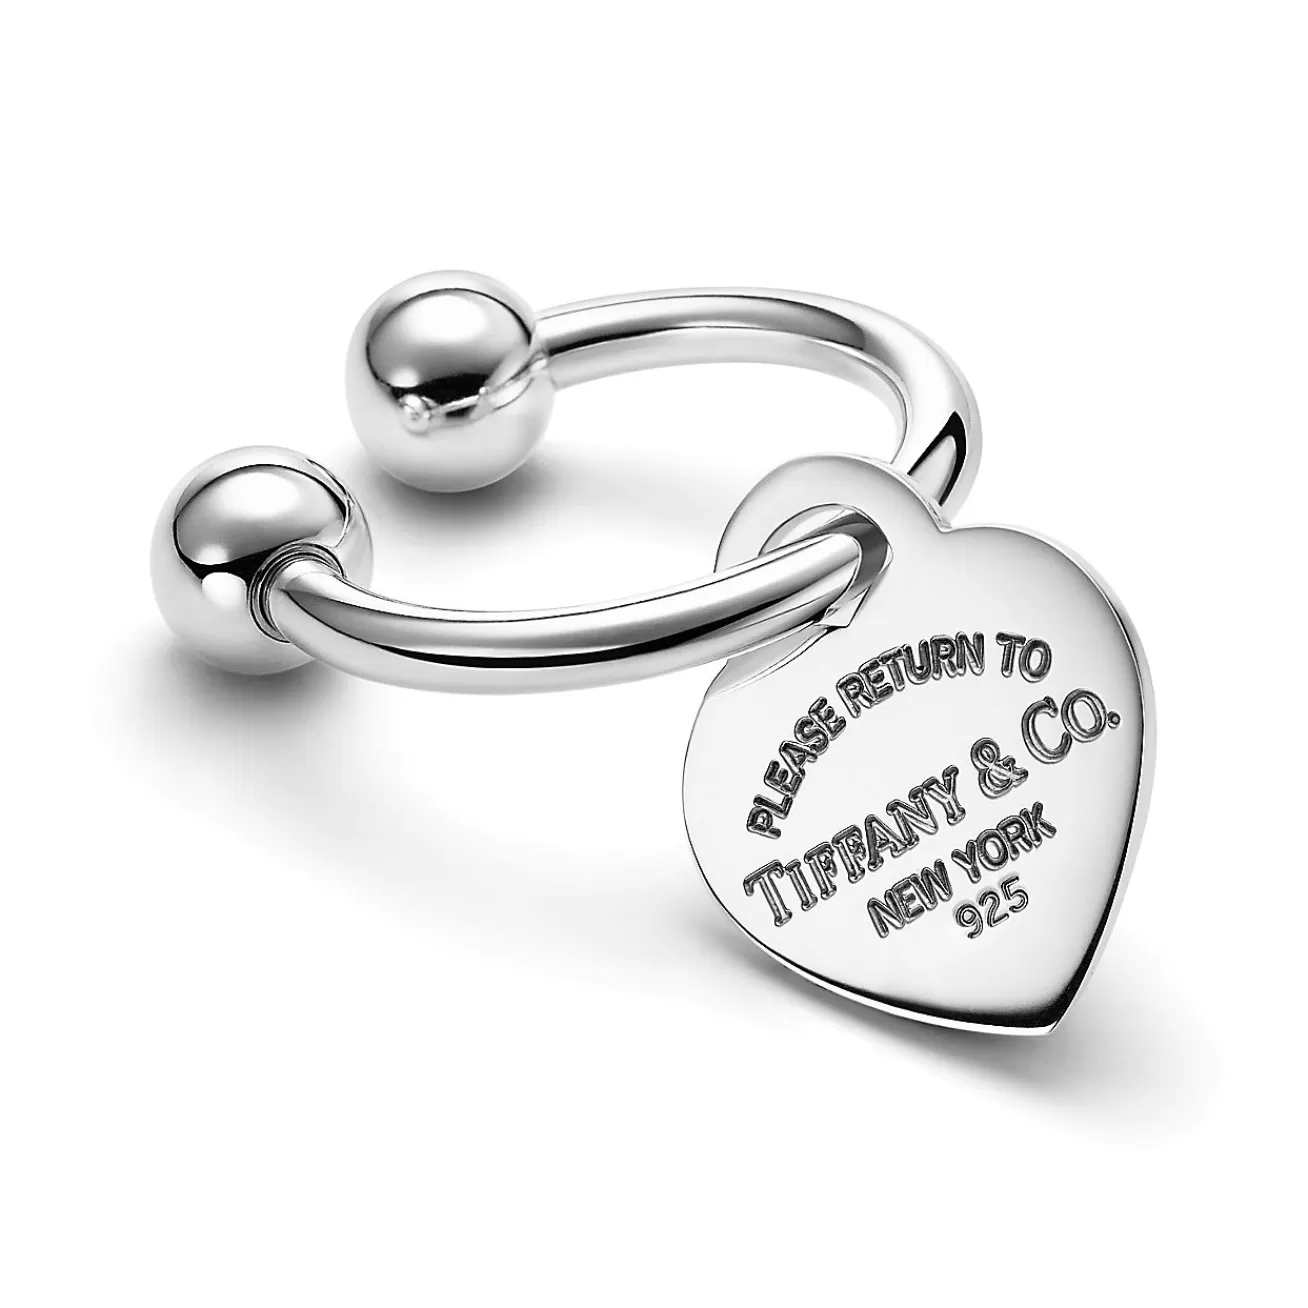 Tiffany & Co. Return to Tiffany® heart tag key ring in sterling silver, medium. | ^Women Gifts to Personalize | Key Rings